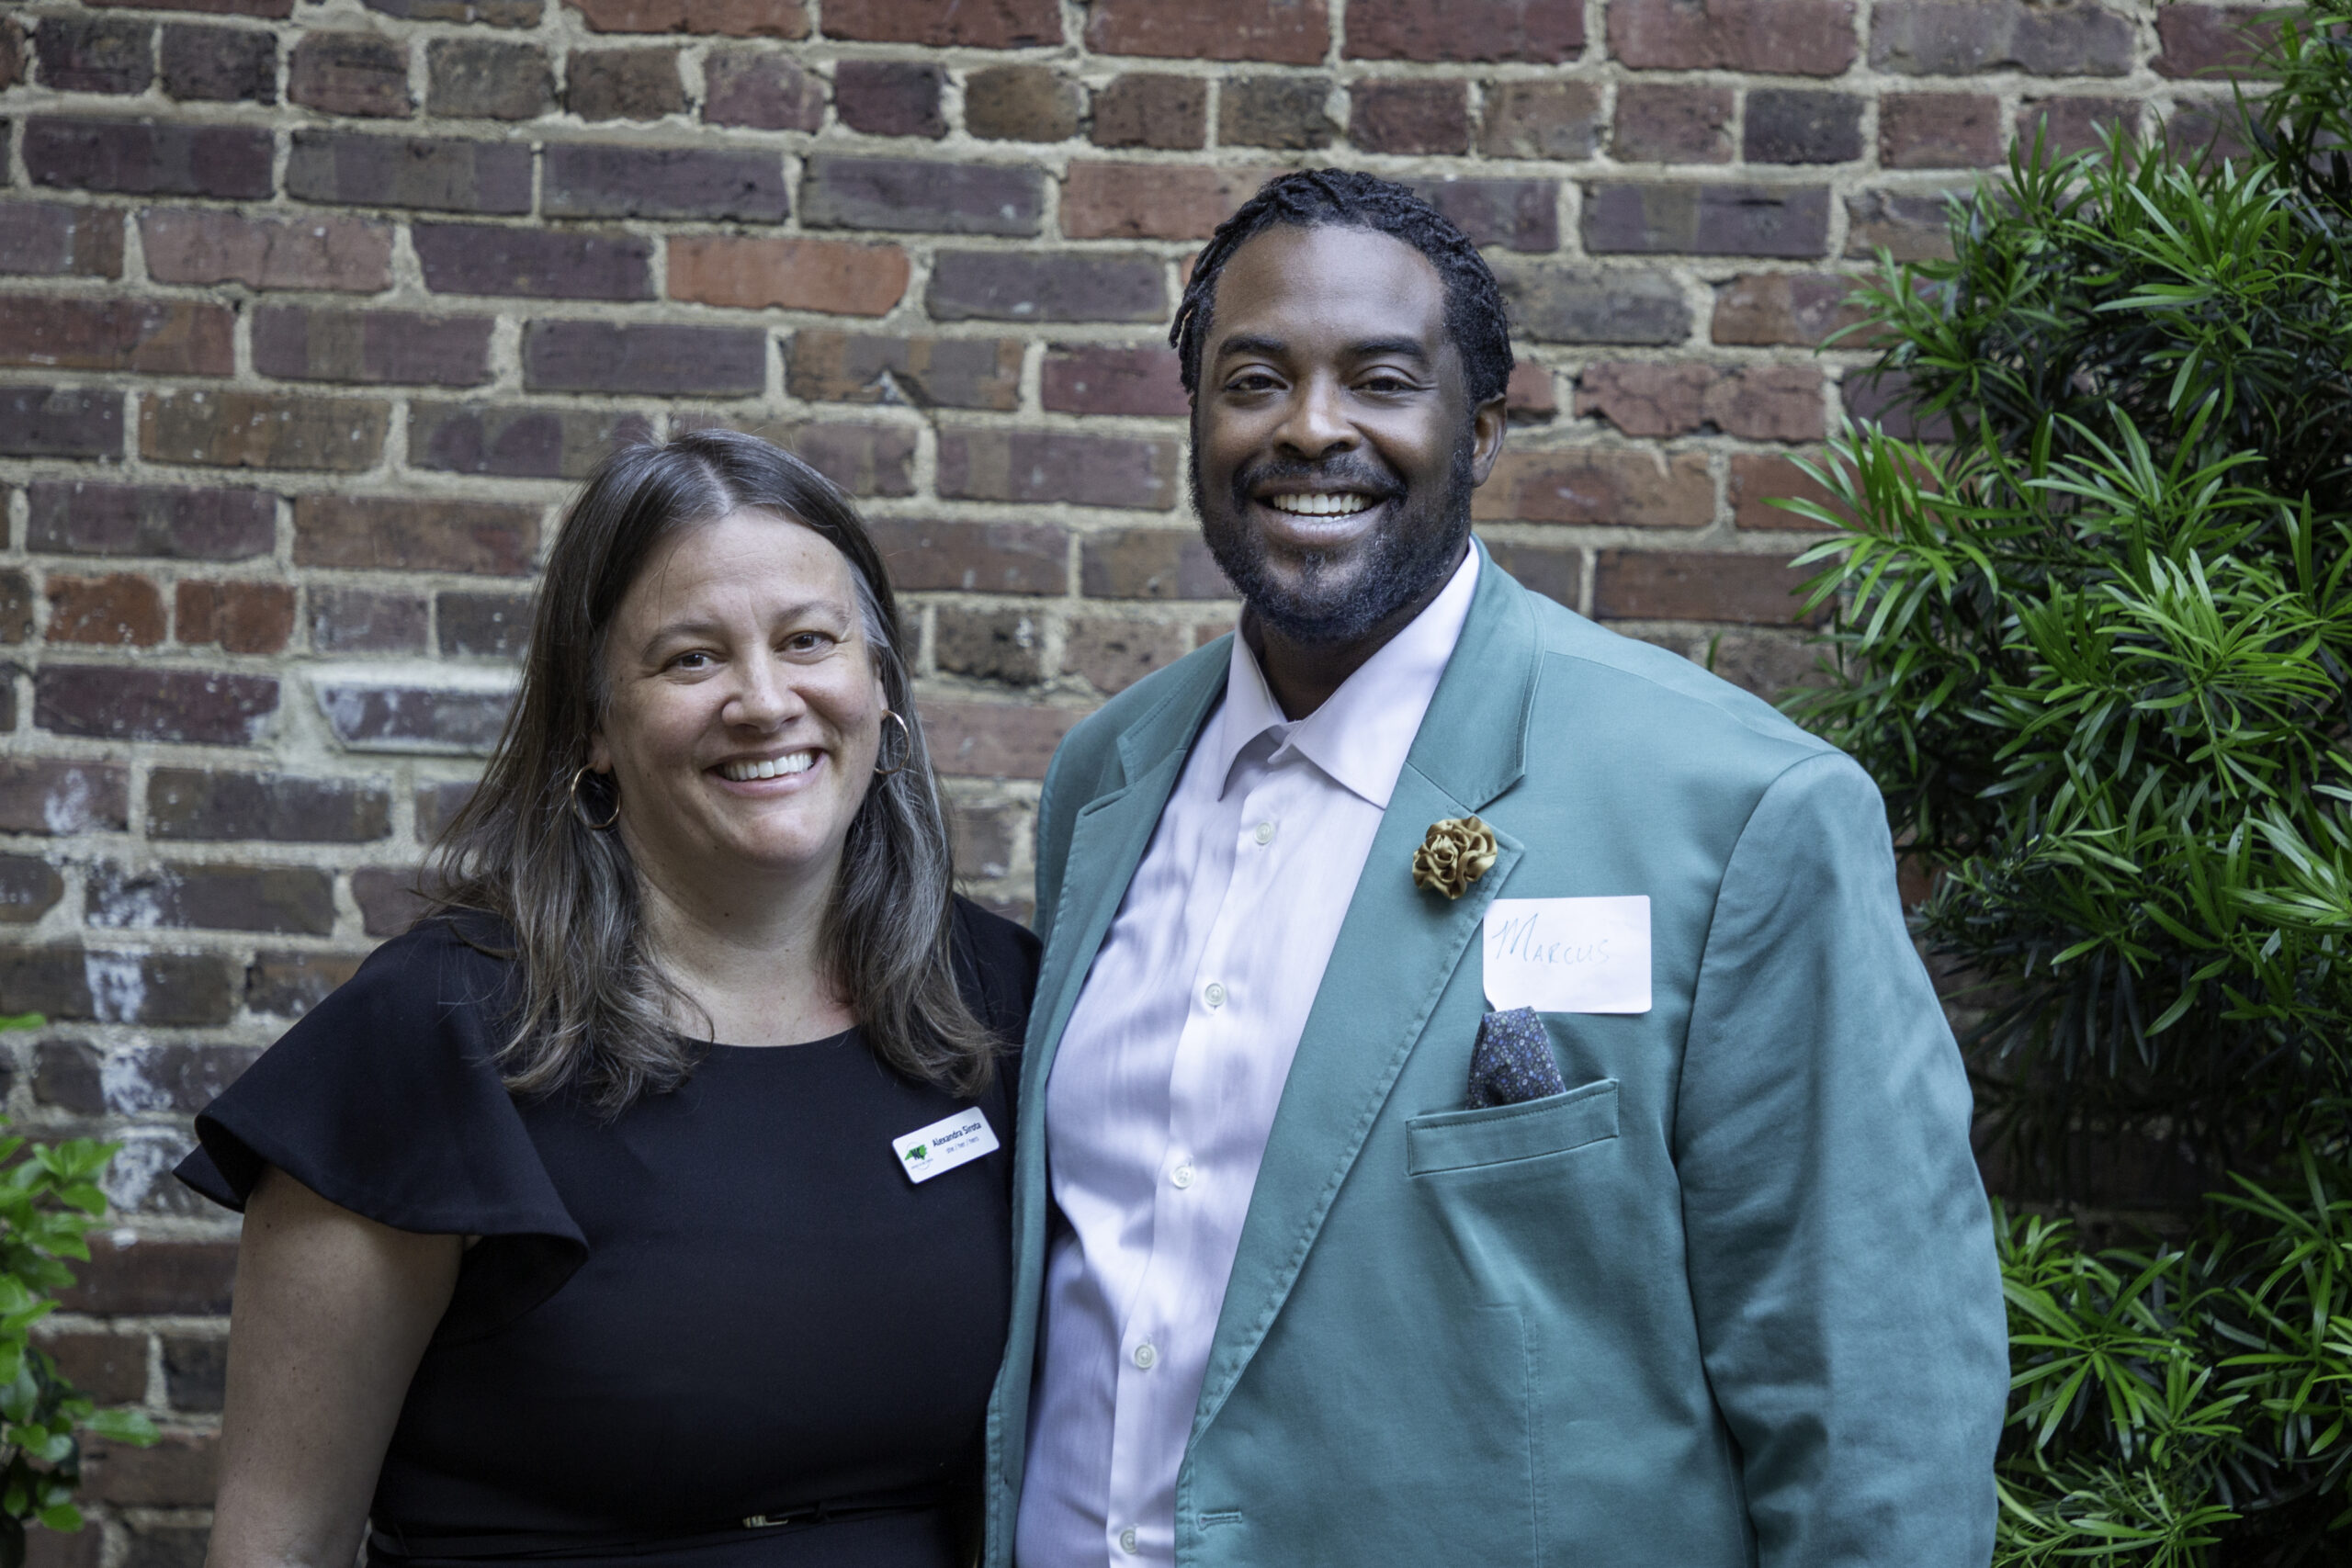 Alexandra Sirota and Marcus Bass pose together at the Budget & Tax Center's first anniversary party.